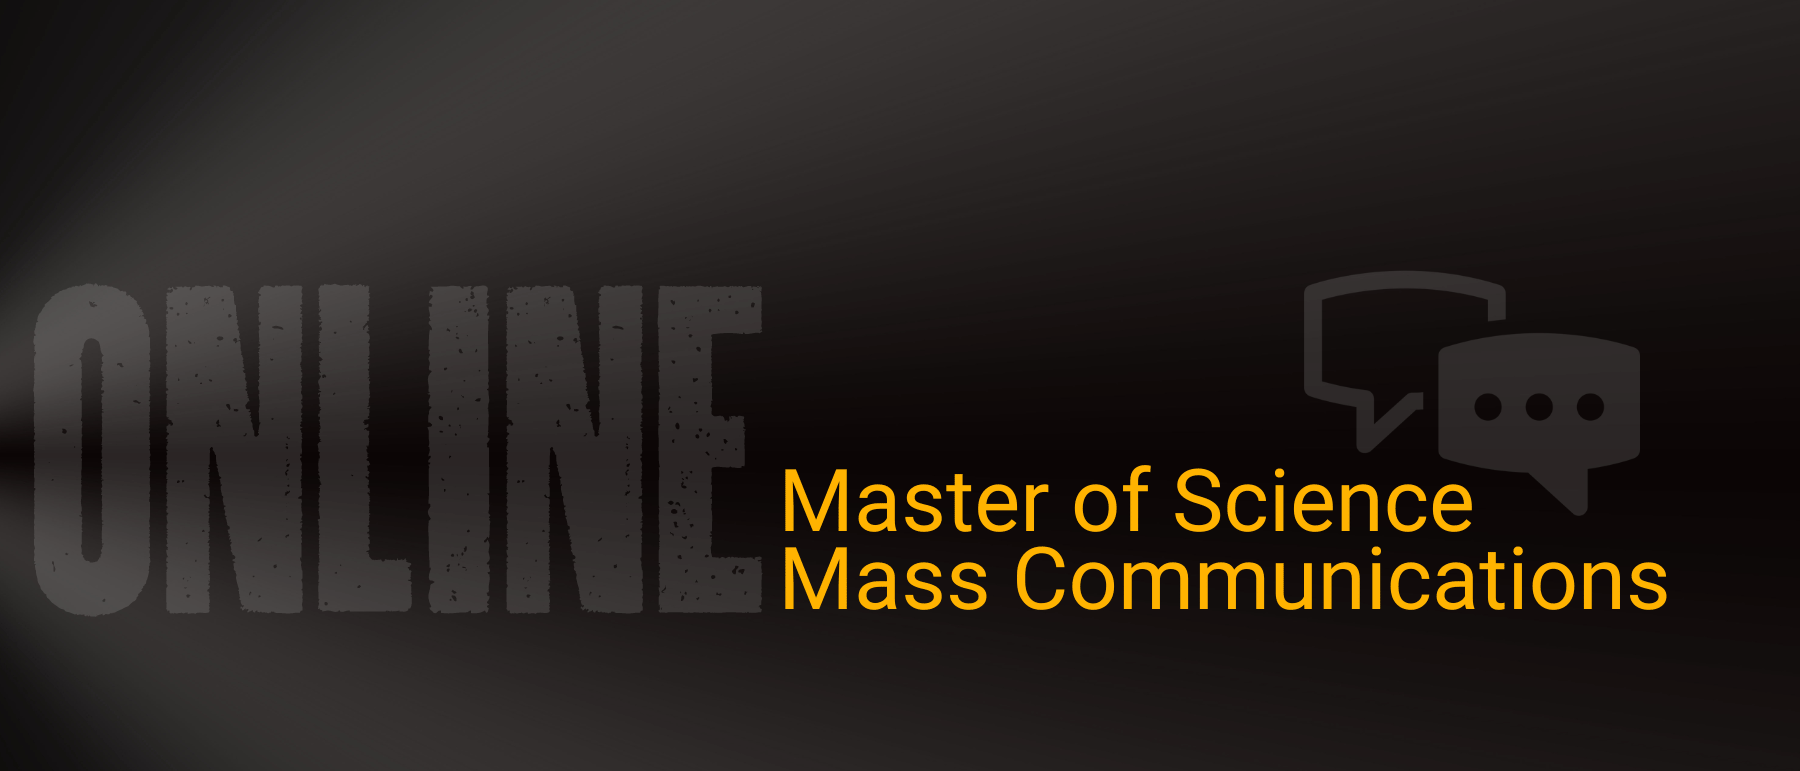 Online Master of Science Mass Communications